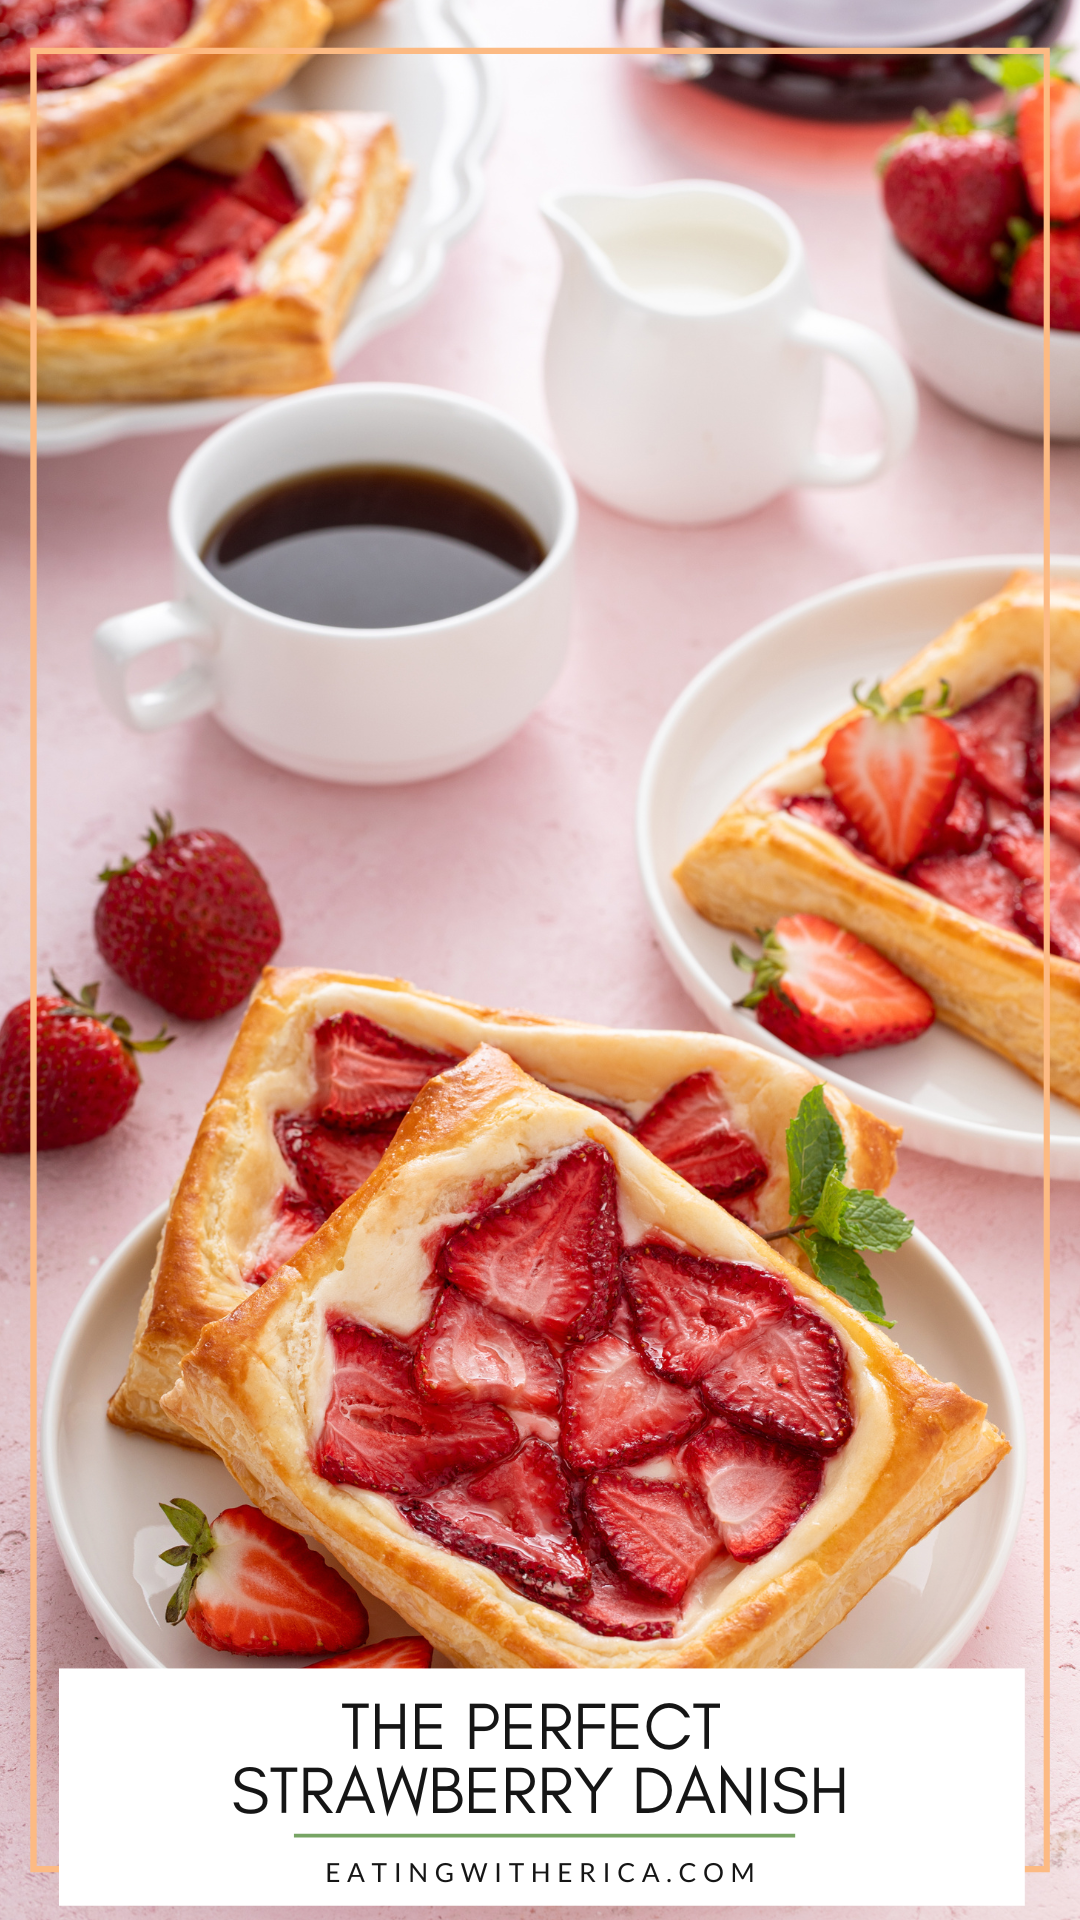 Hands down the perfectly easy yet delicious baked Strawberry Danish! Topped with a delicious  cream cheese filling and fresh strawberries this danish is sure to be a hit!